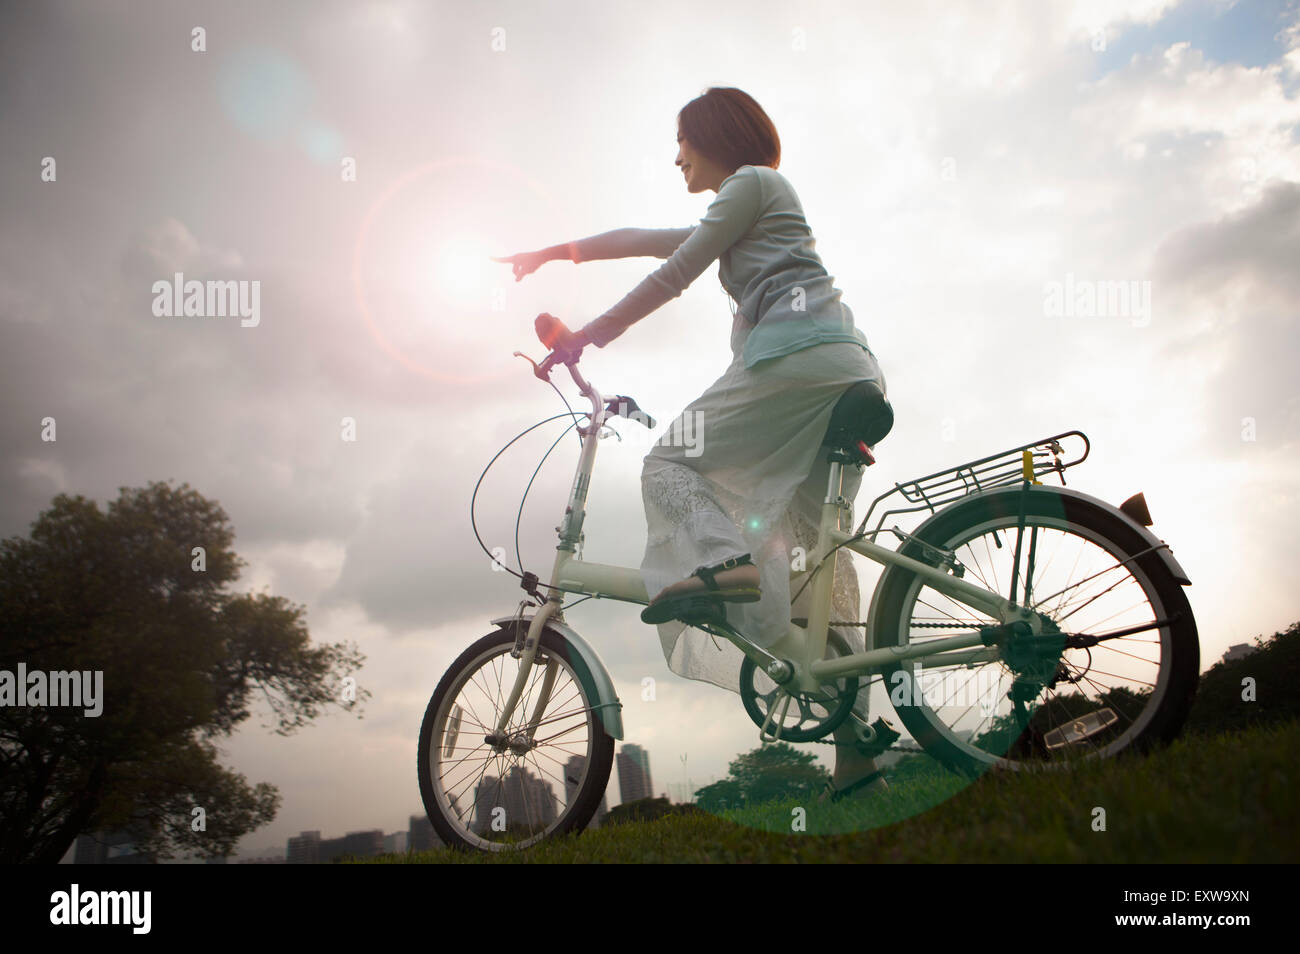 Young woman riding a bike and pointing away, Stock Photo